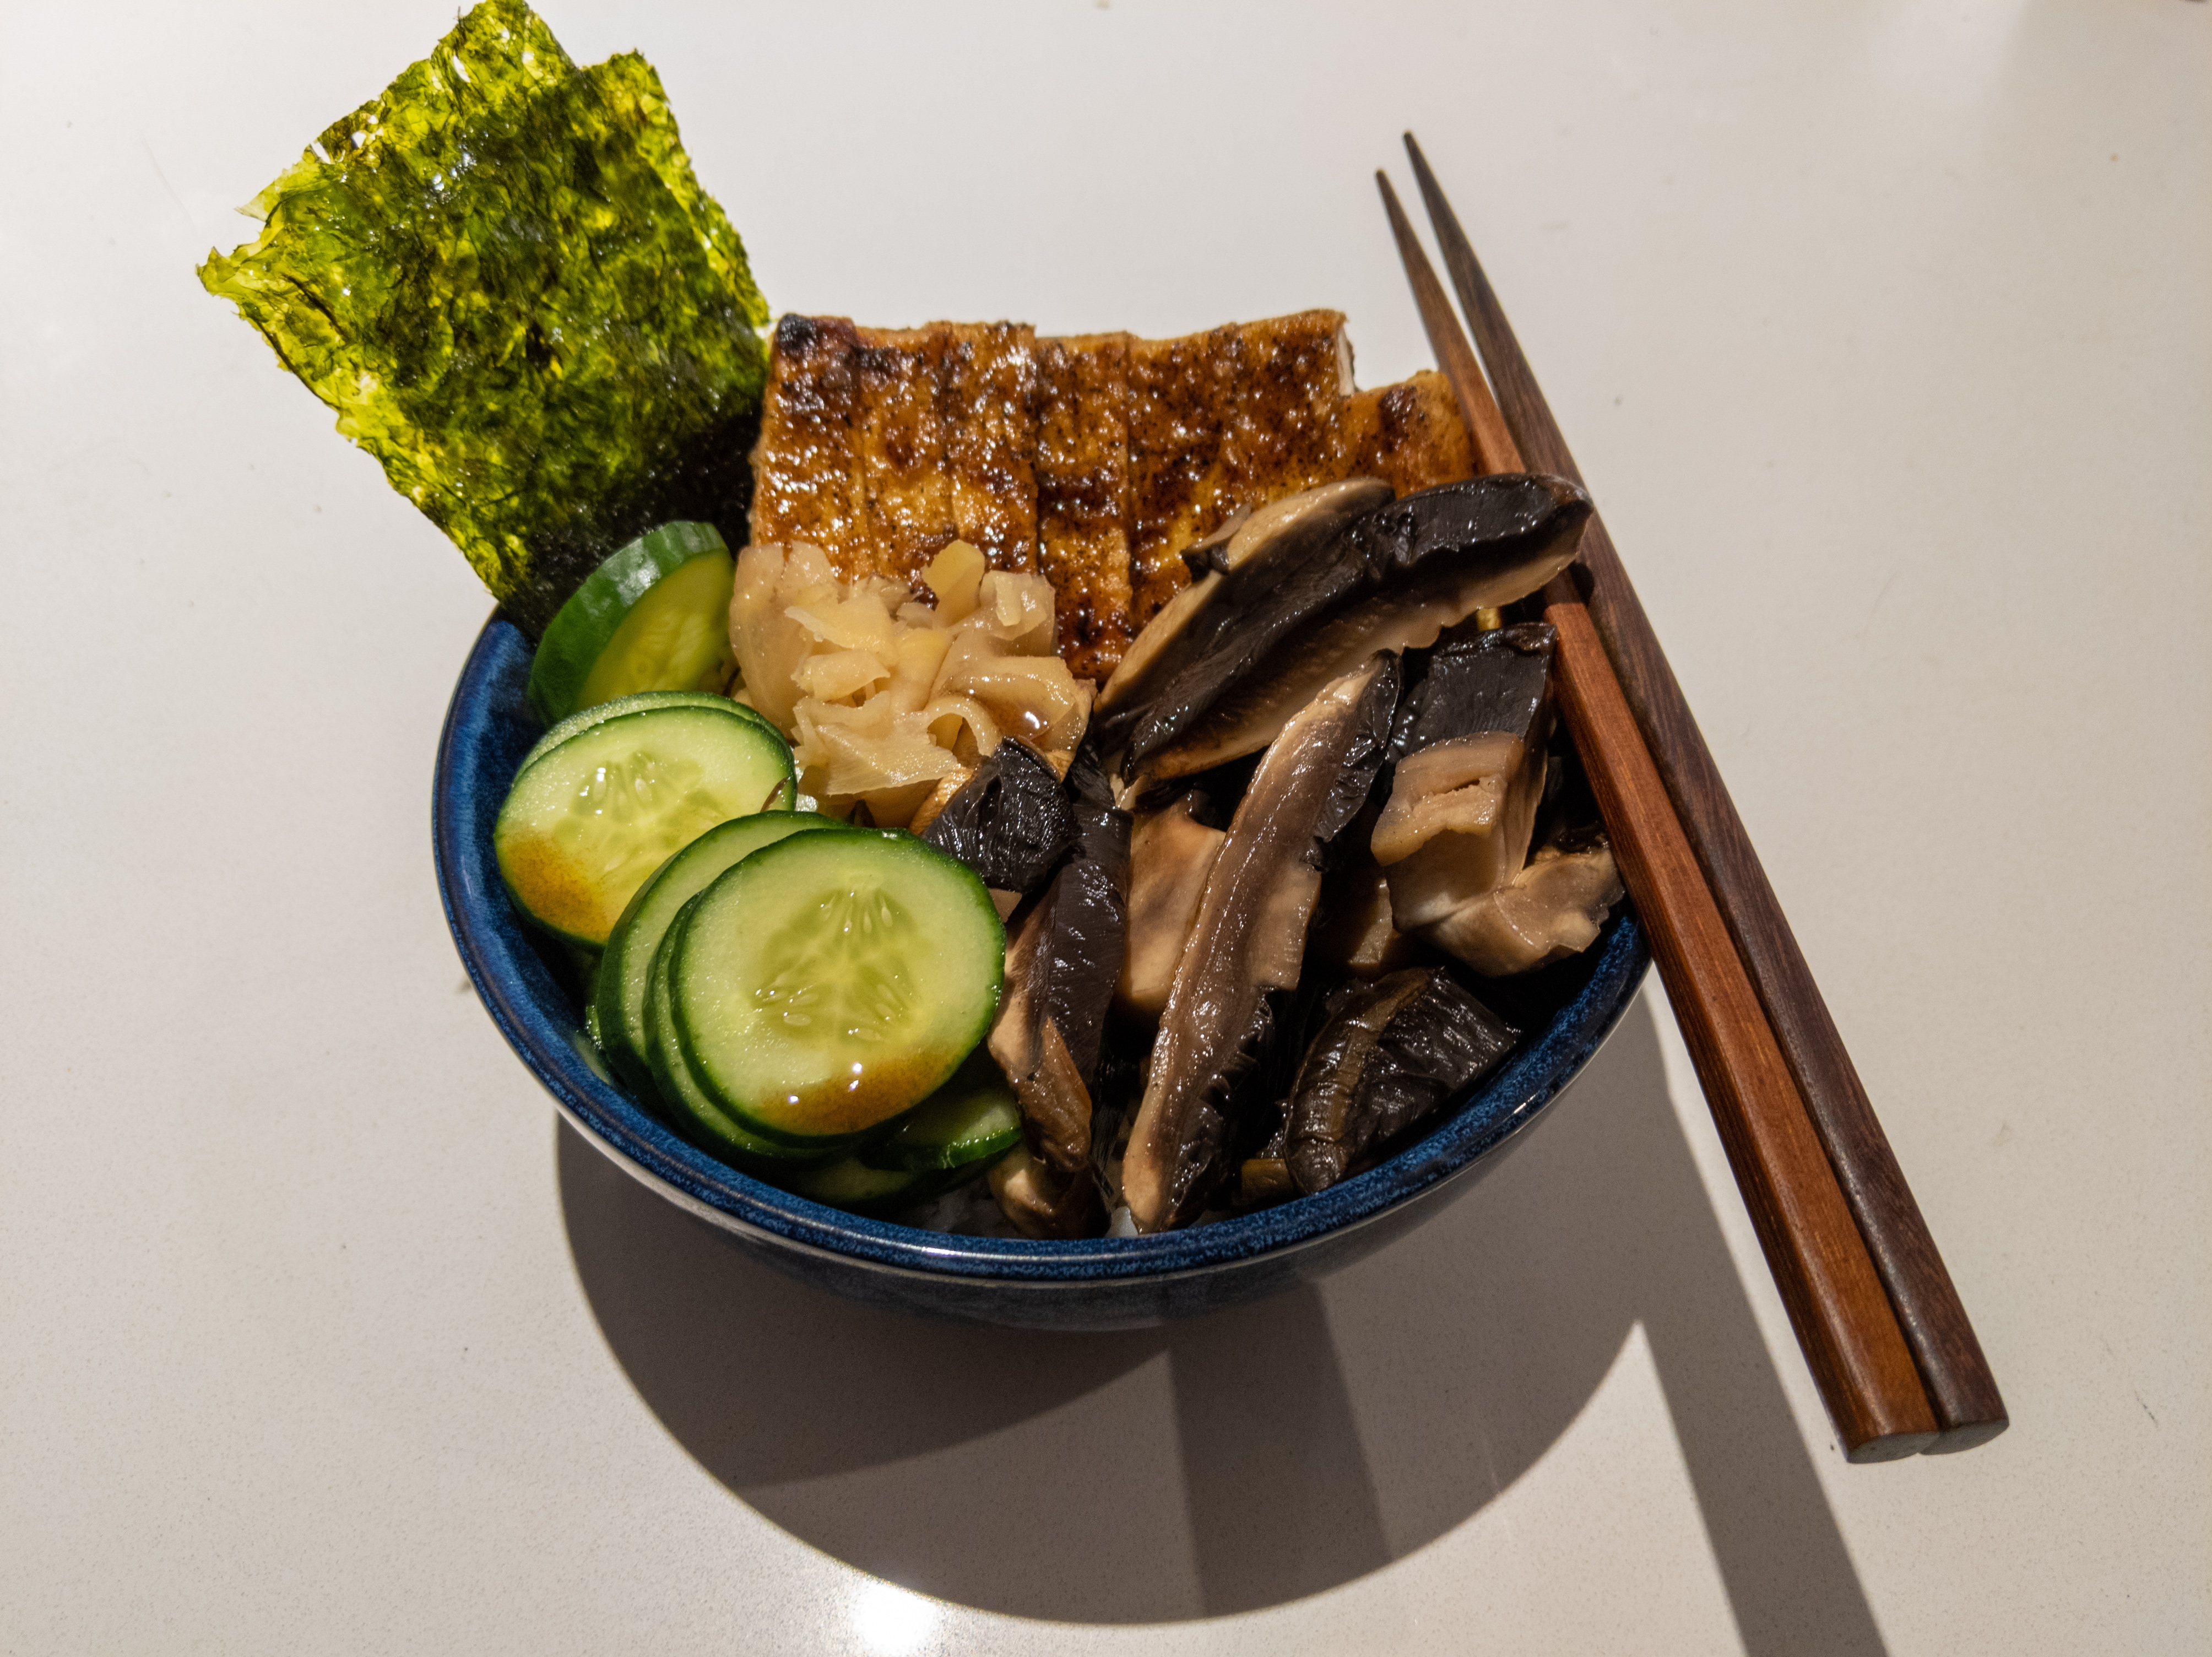 A blue bowl with some chopsticks on the side, filled with rice and toppings. The toppings are pickled ginger, wheels of cucumber, slices of mushroom, slices of tofu, and some pieces of seaweed.